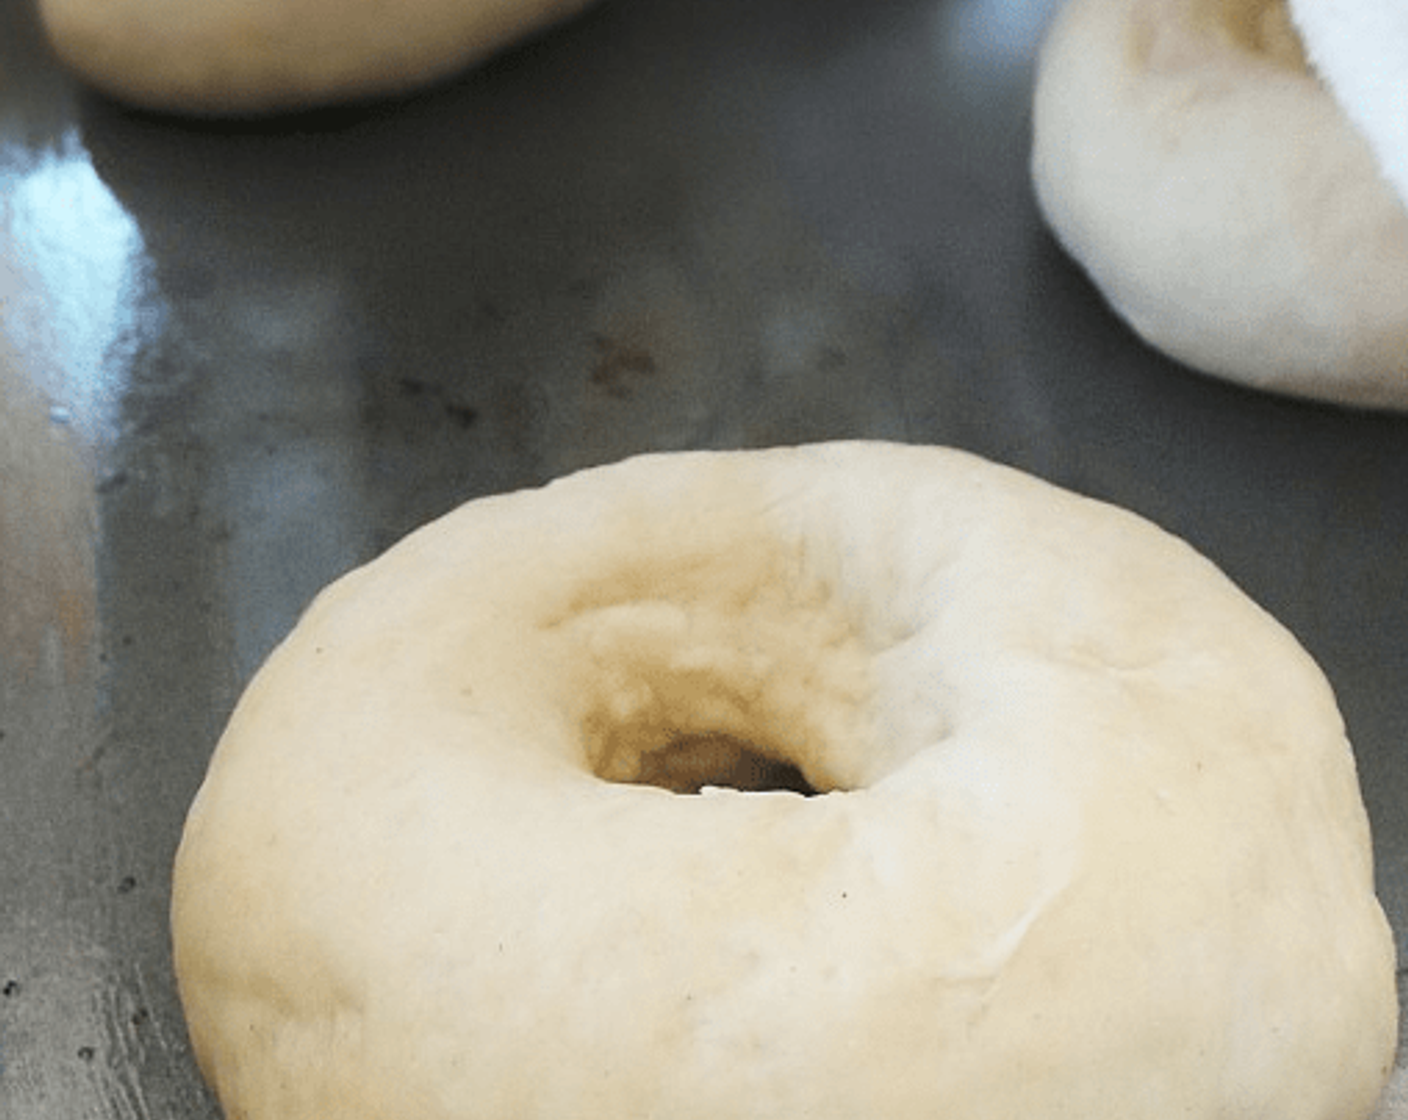 step 7 Coat a finger in flour, and gently press your finger into the center of each dough ball to form a ring. Stretch the ring to about 1/3 the diameter of the bagel and place on a lightly oiled cookie sheet.